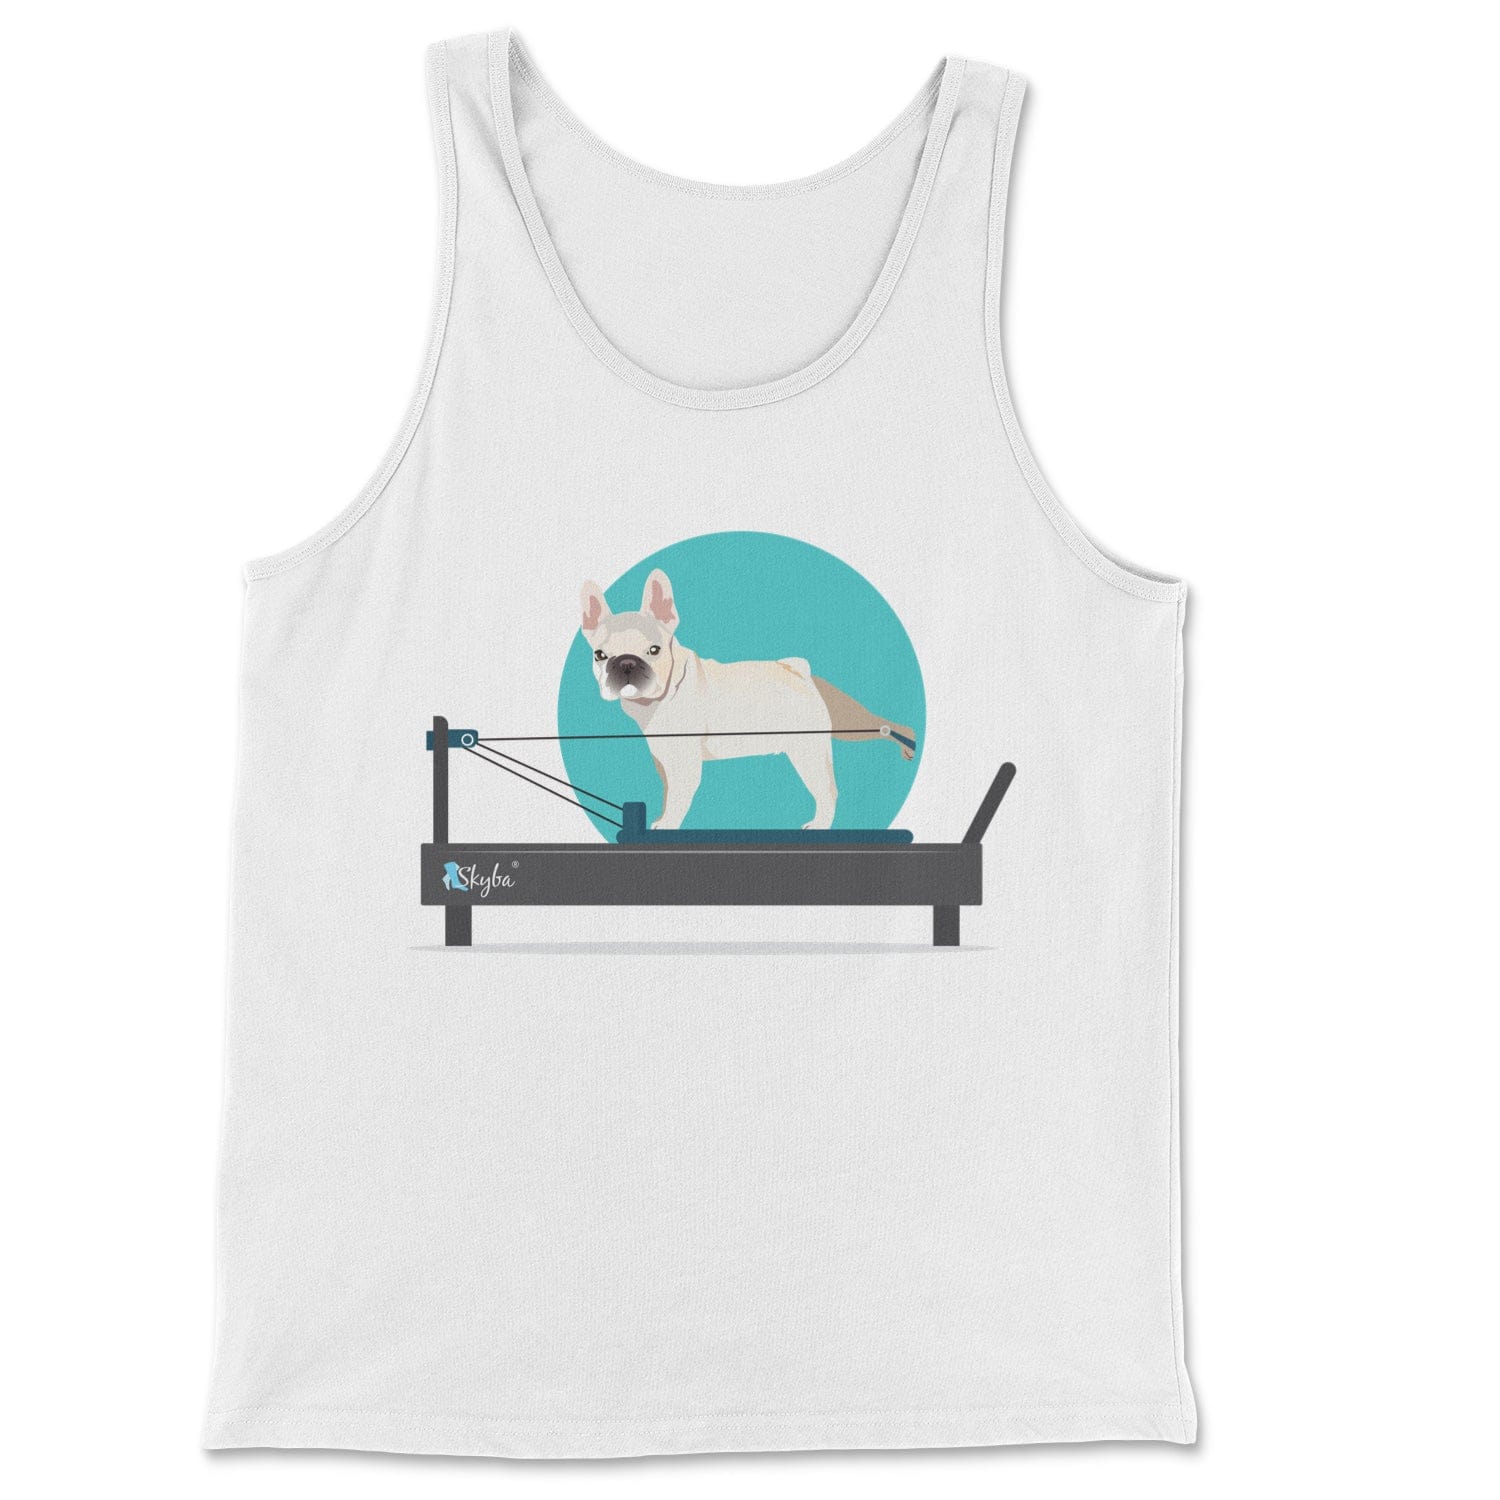 French Bulldog on the Reformer - Classic Tank Skyba Print Material